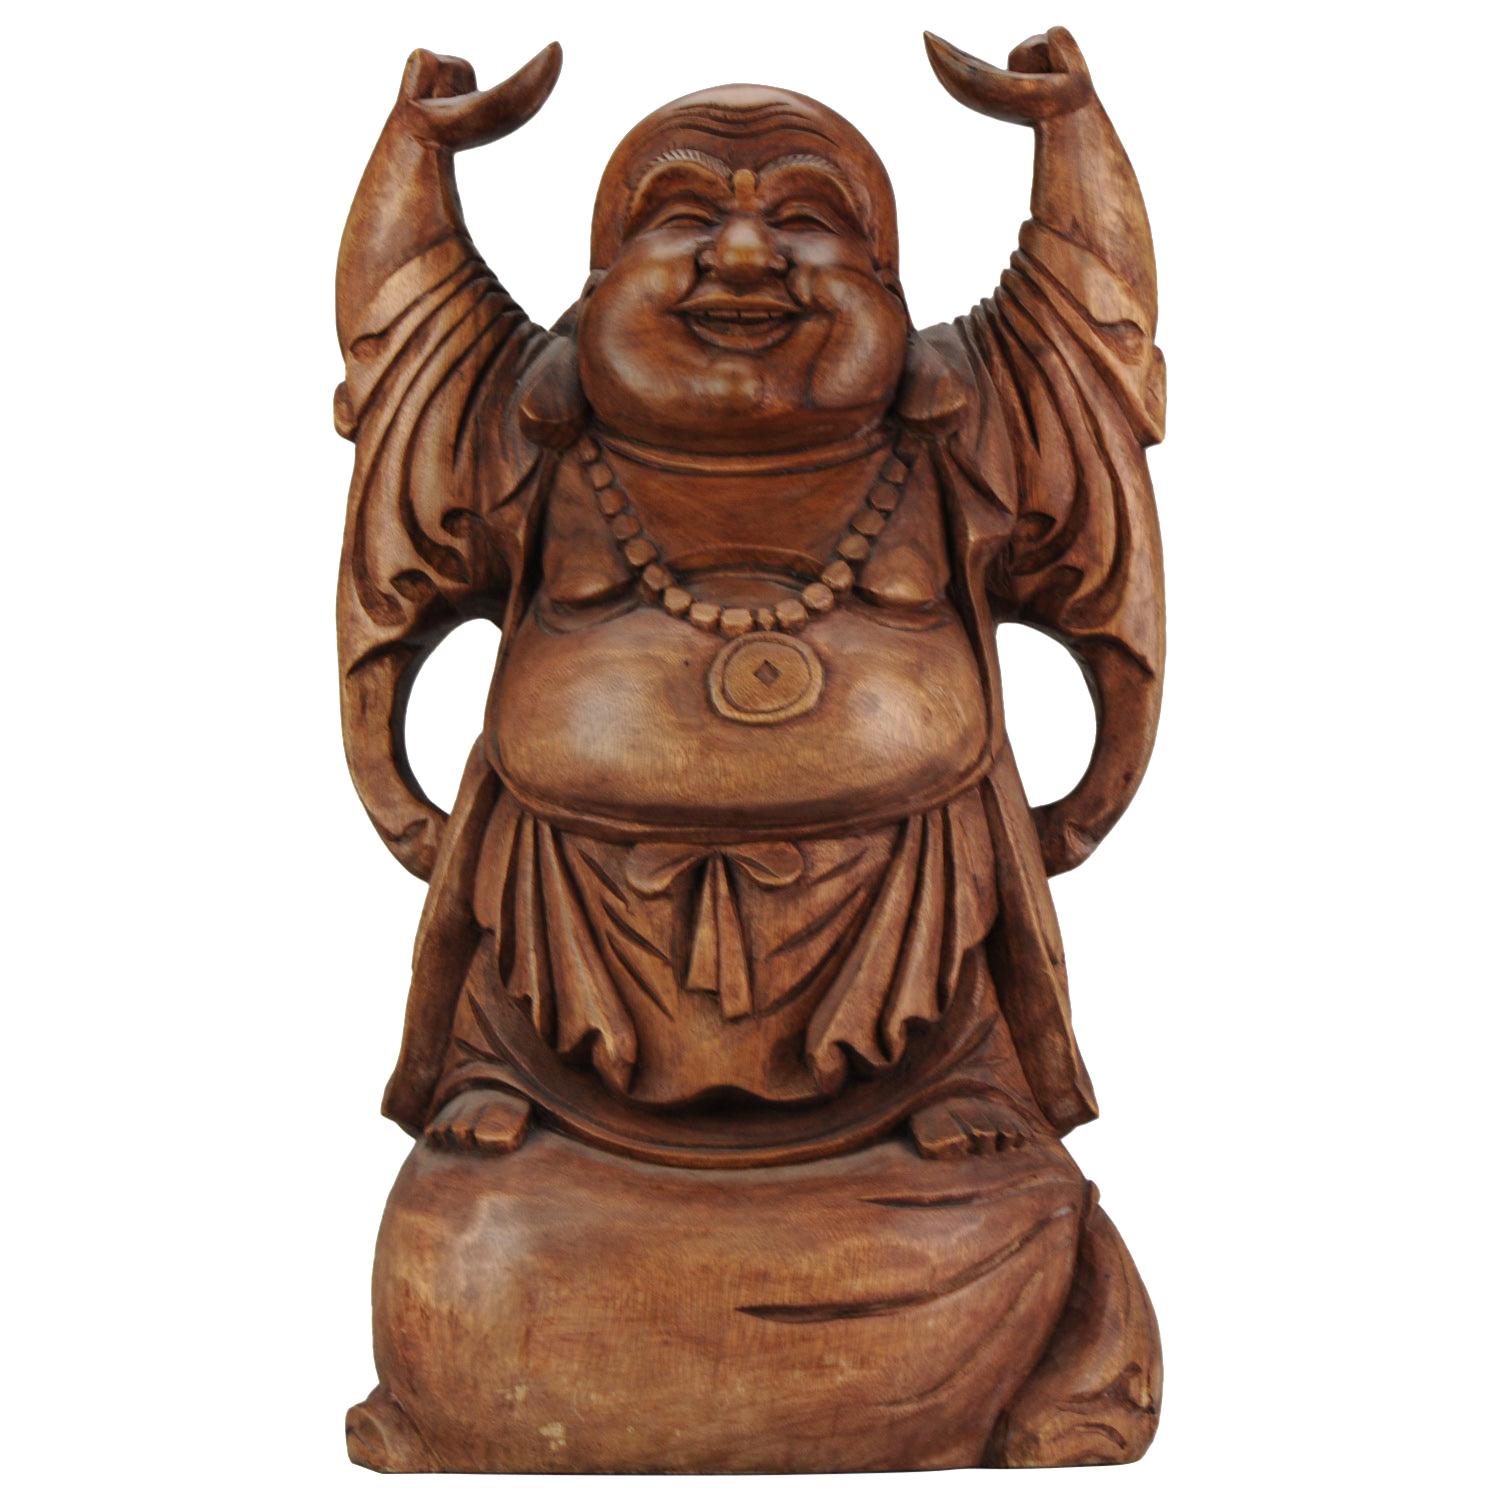 What is Chinese wood carving?